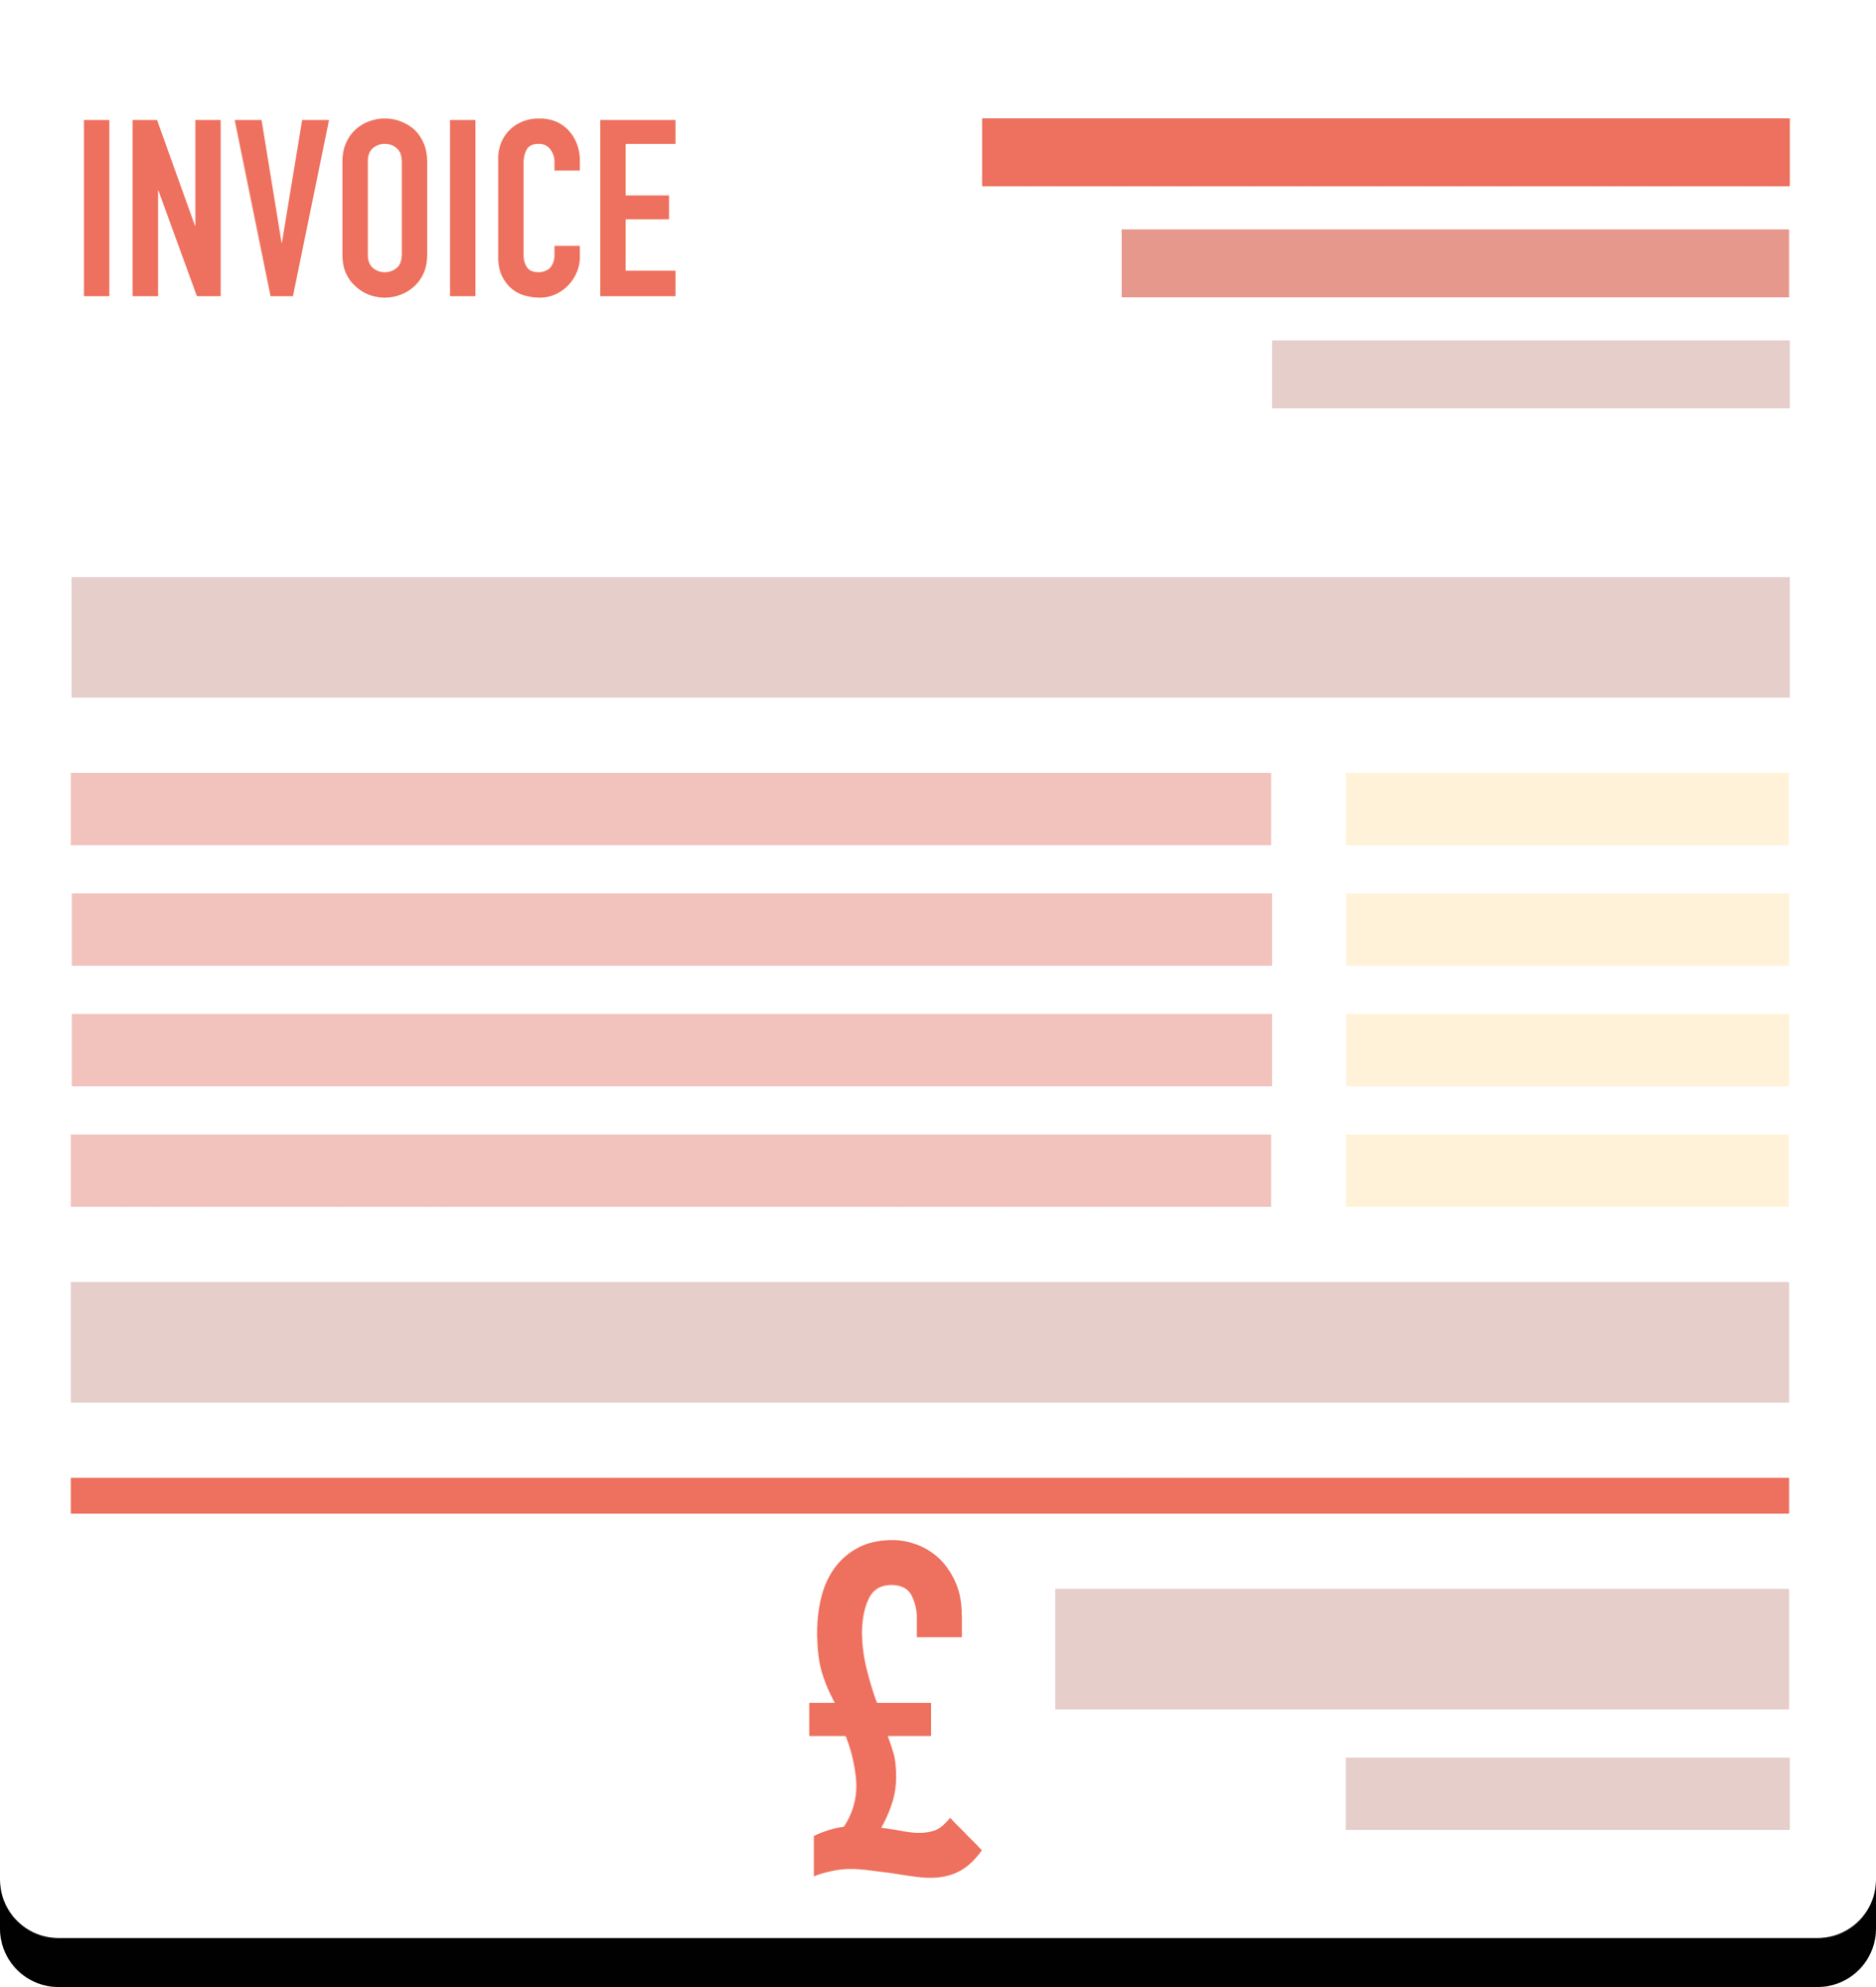 Invoice template for Ground Working